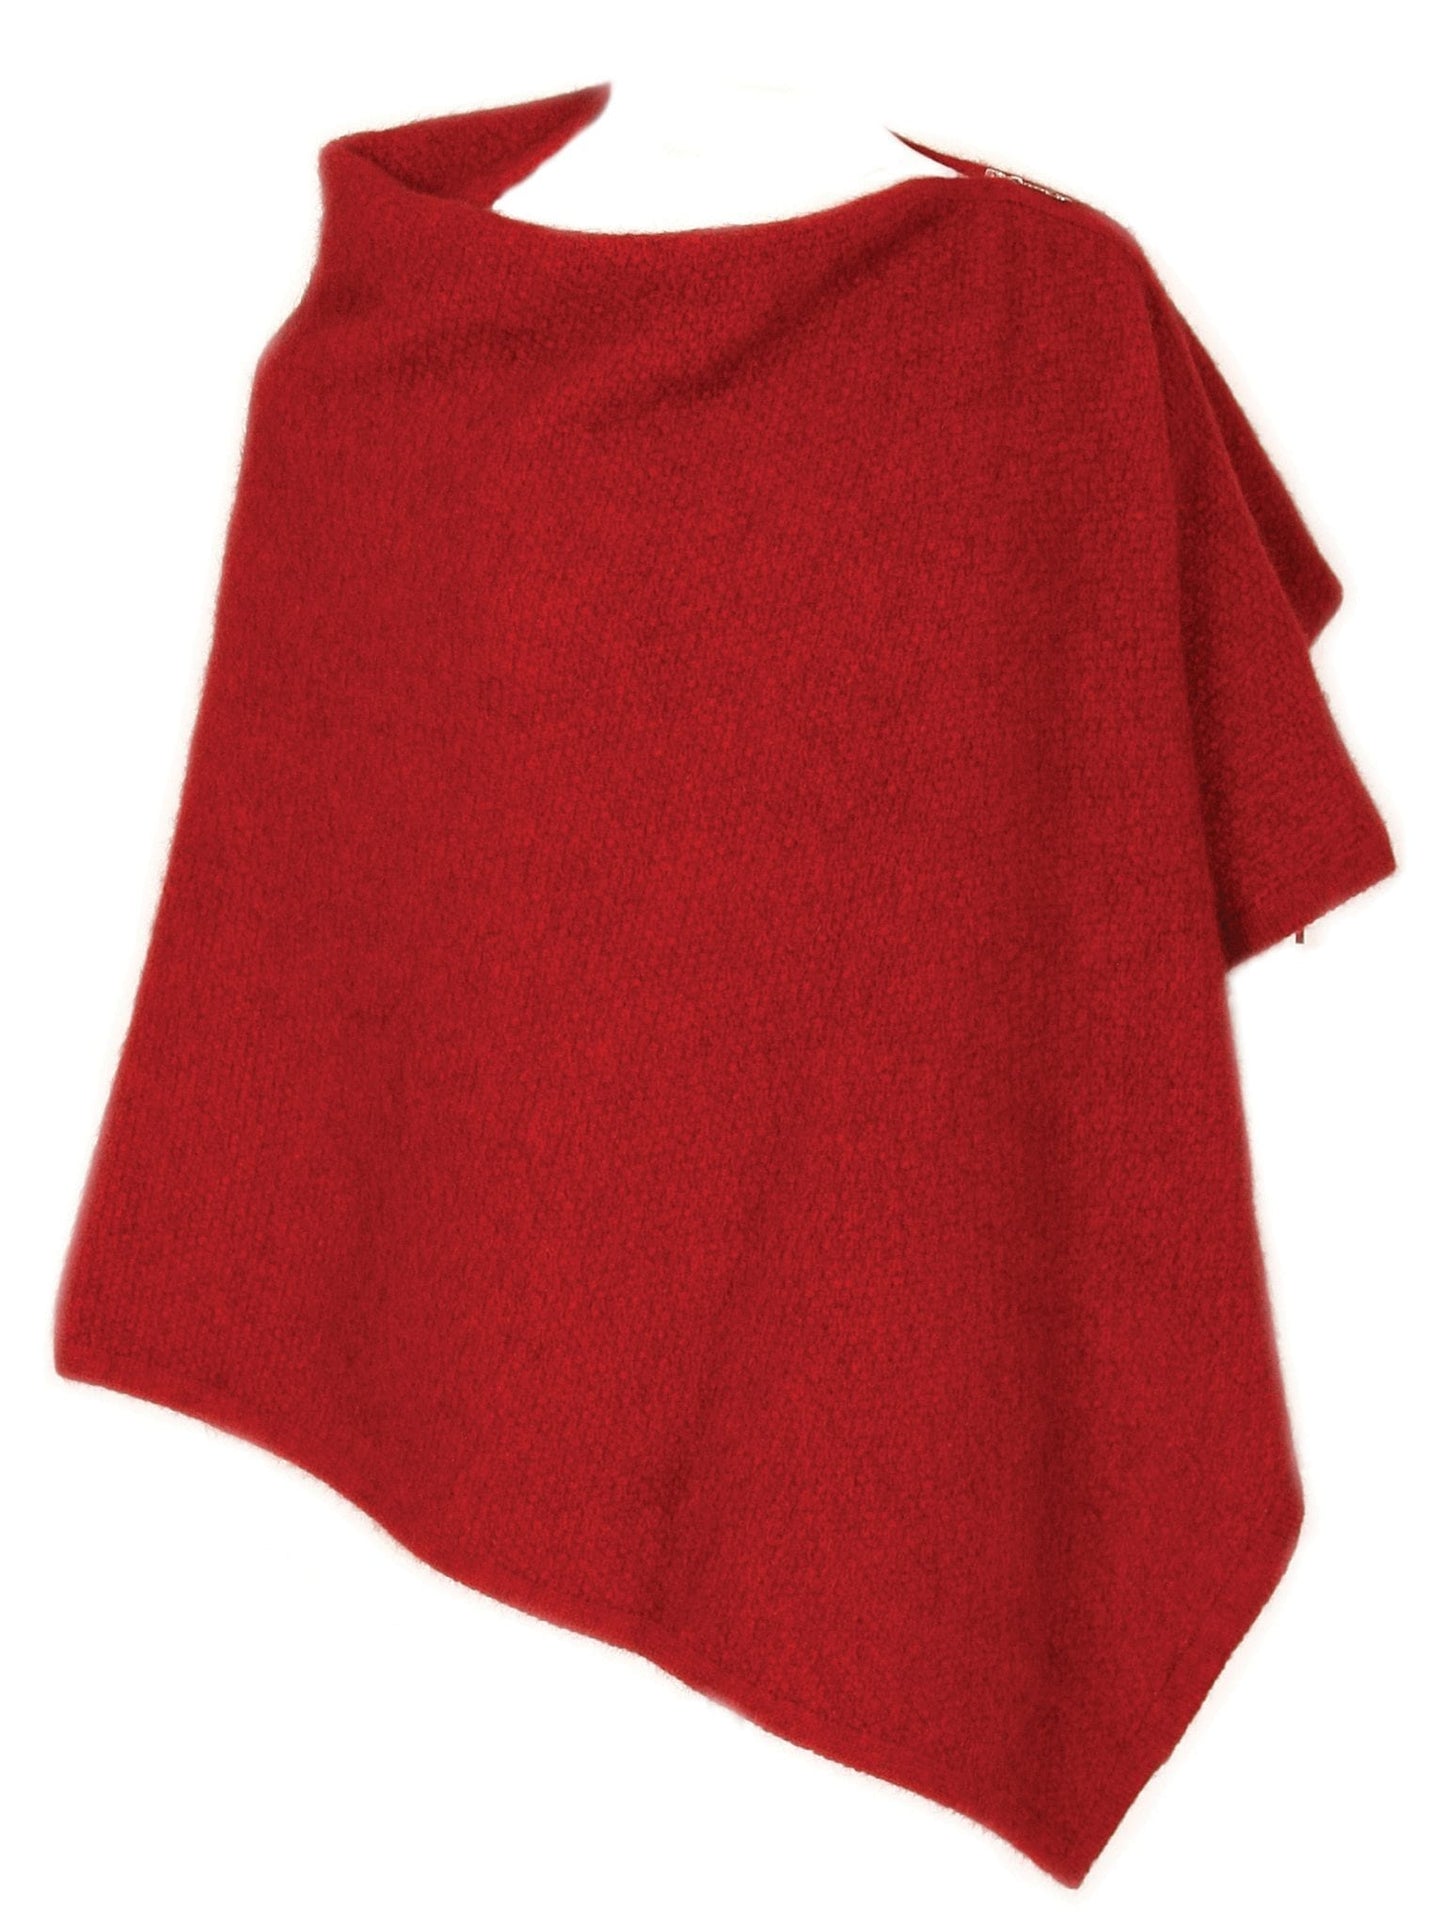 A beautiful textured wrap that can be worn several ways - as a poncho with the zip over the shoulder, zip to the front like a cape, as a wrap or scarf and if you feel a bit daring, a skirt! Available in 12 colourways. Made in NZ by Lothlorian. Red.